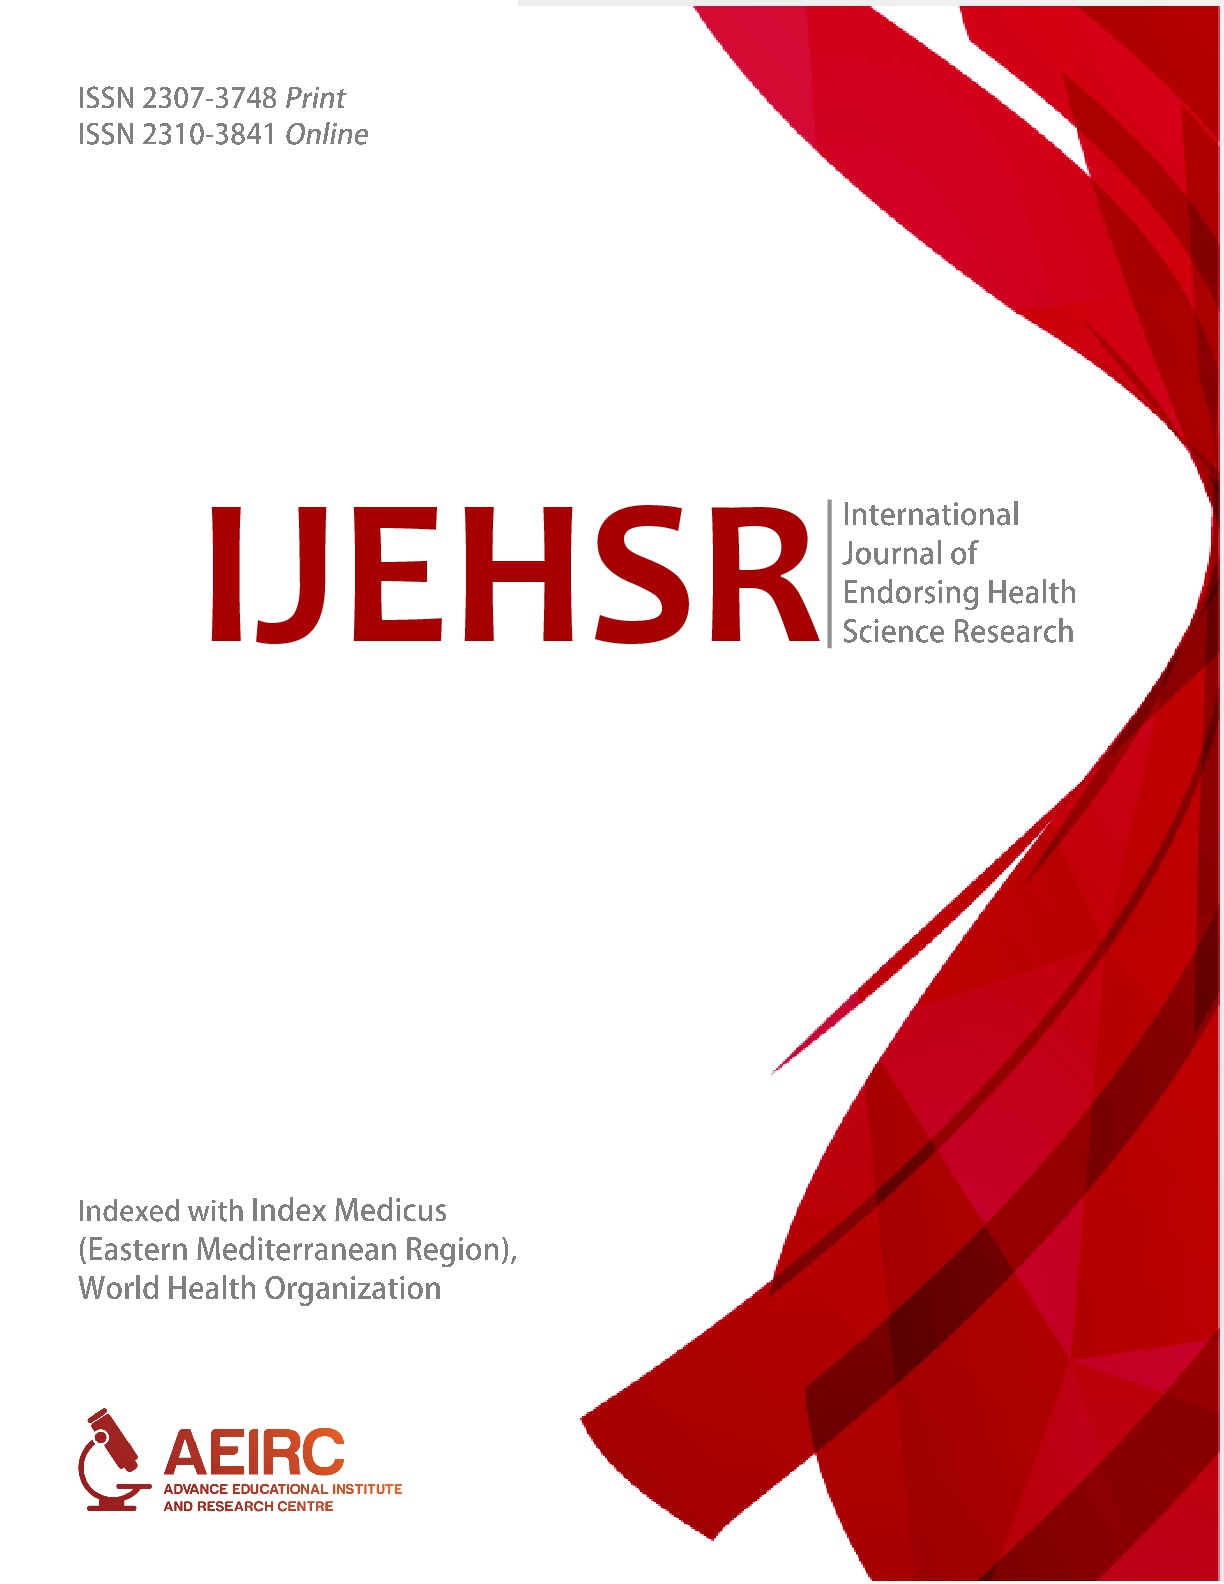 					View Vol. 7 No. 1 (2019): International Journal of Endorsing Health Science Research
				